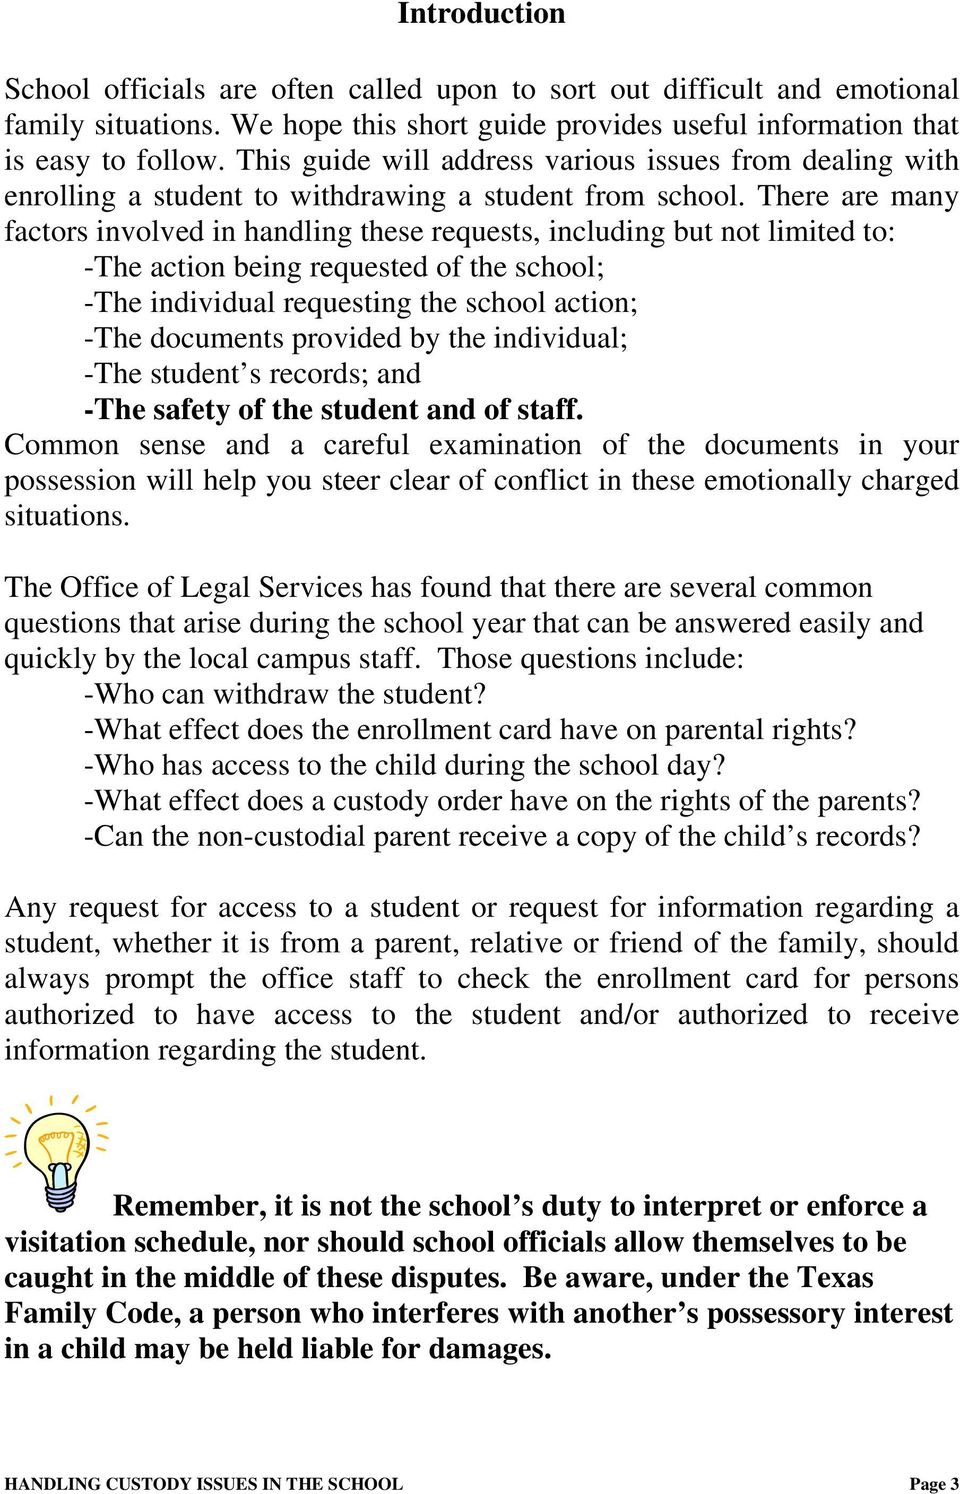 There are many factors involved in handling these requests, including but not limited to: -The action being requested of the school; -The individual requesting the school action; -The documents